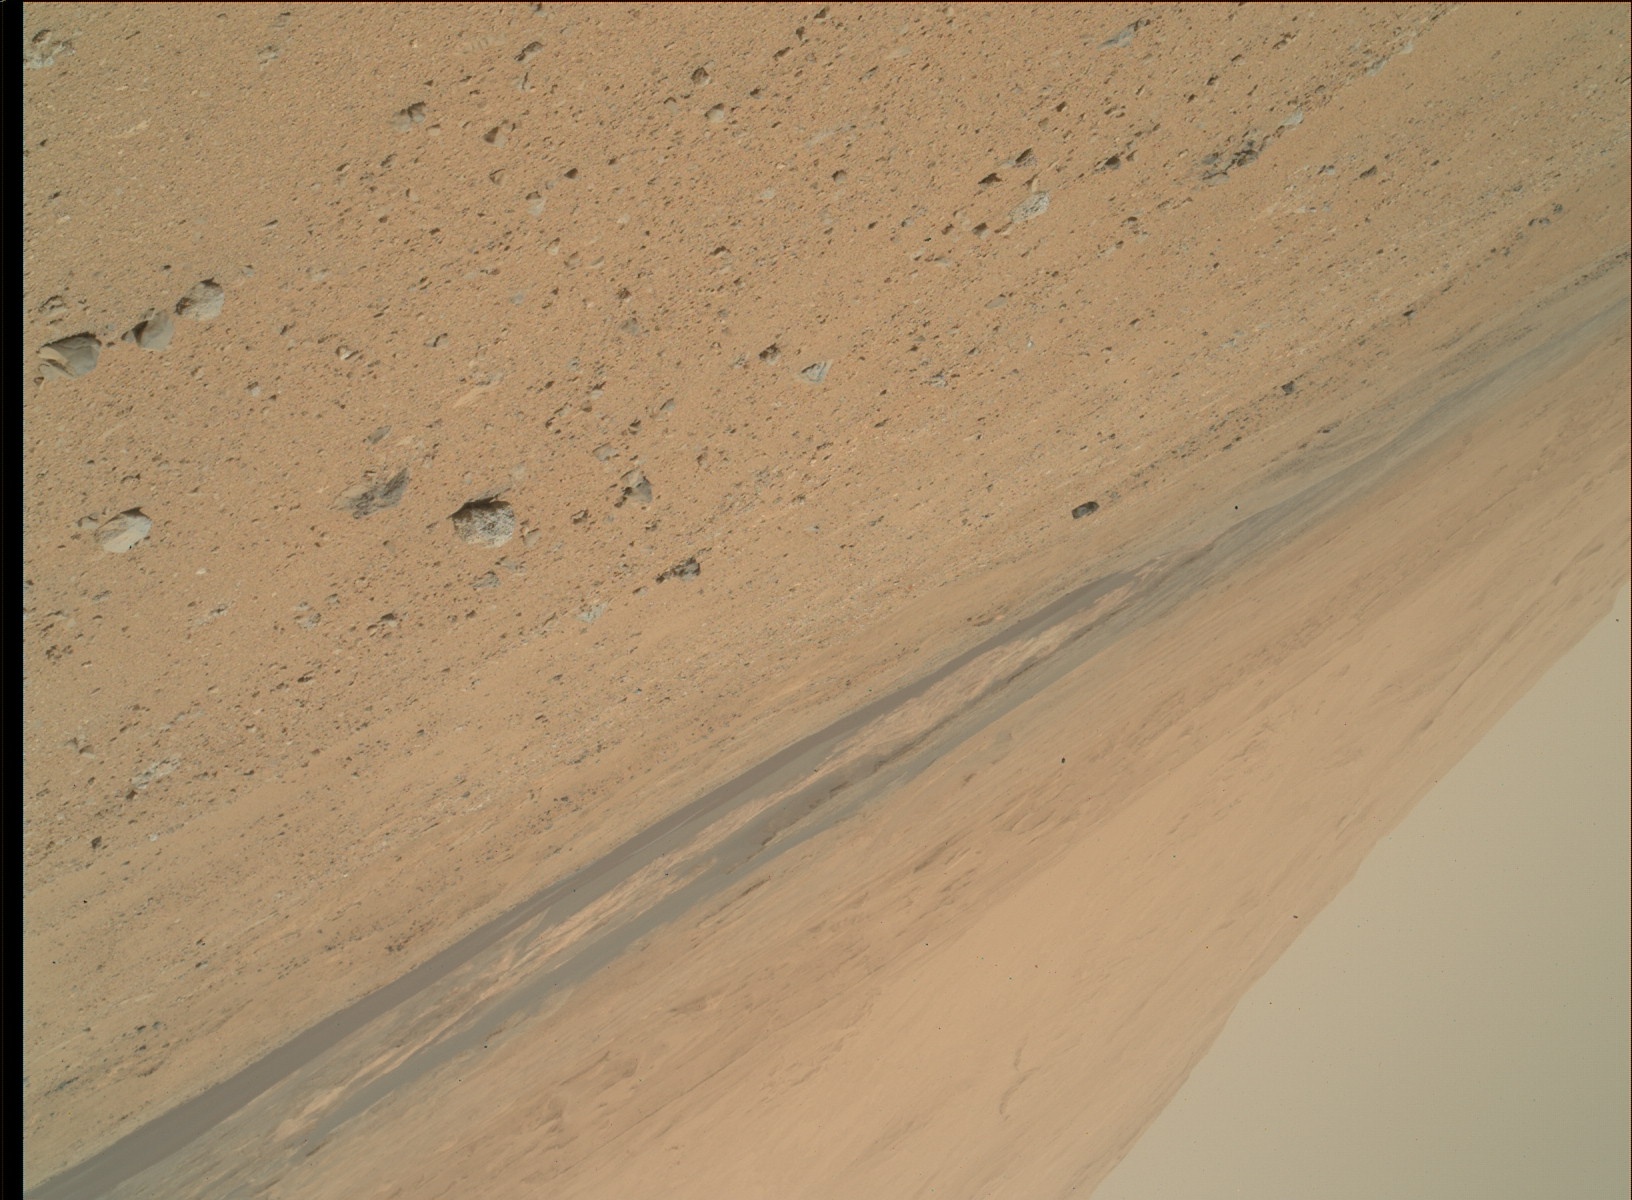 Nasa's Mars rover Curiosity acquired this image using its Mars Hand Lens Imager (MAHLI) on Sol 379